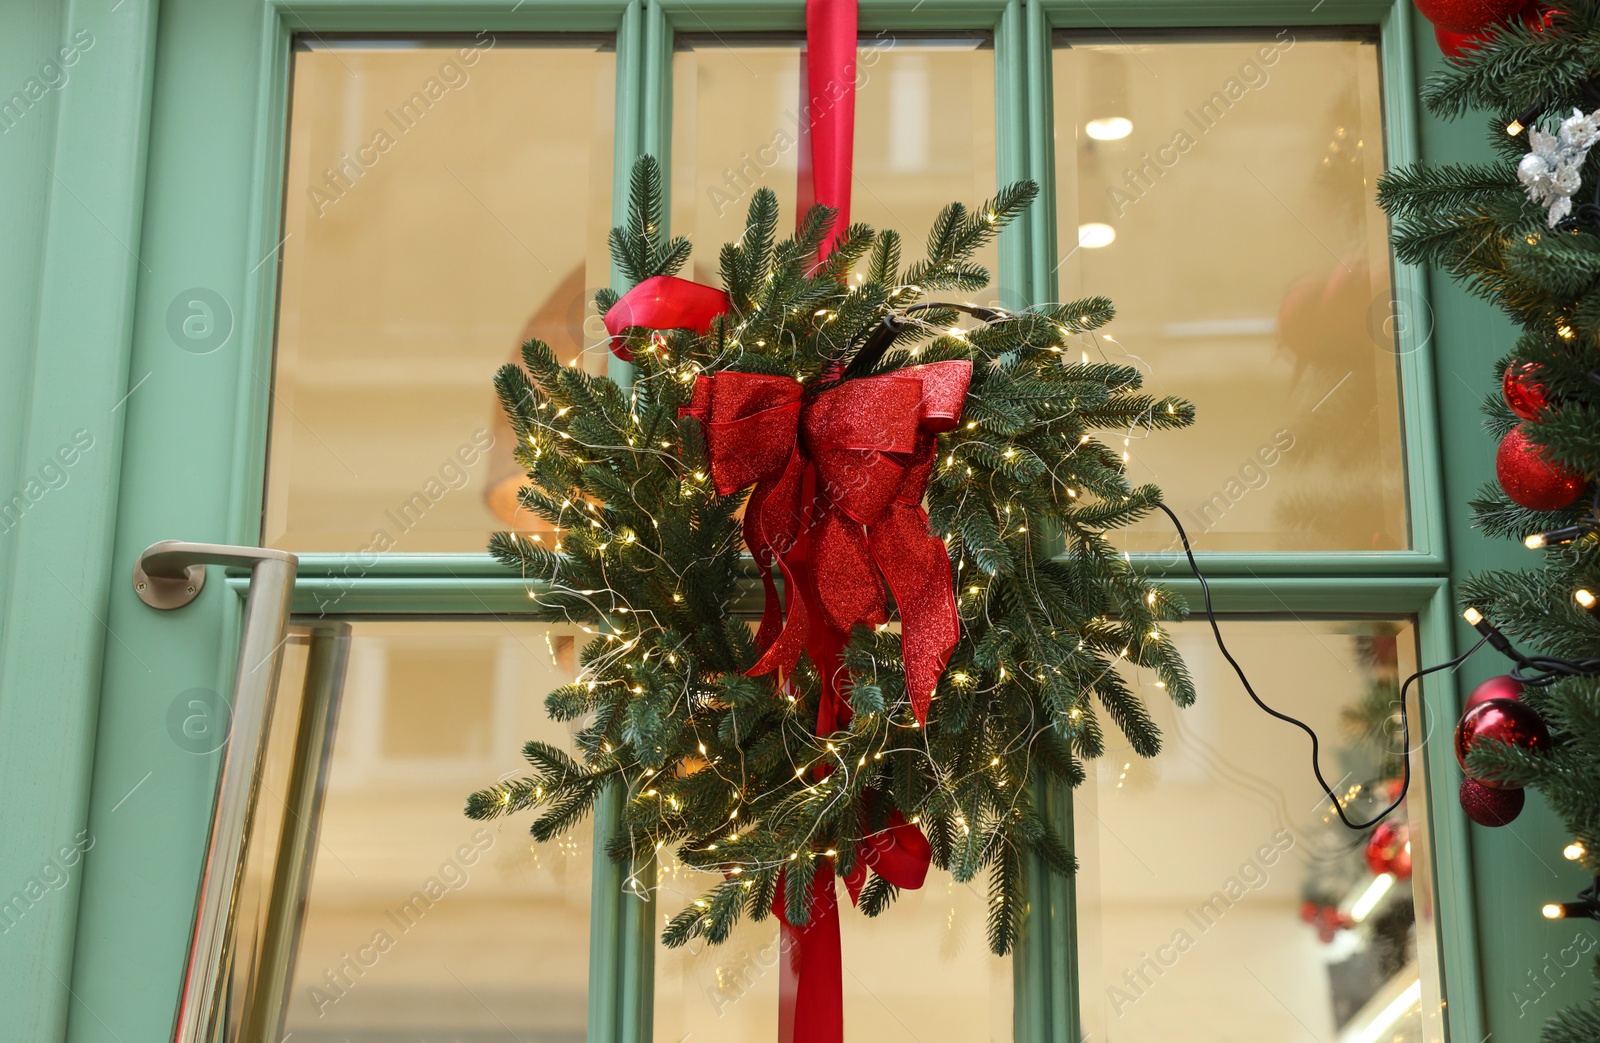 Photo of Beautiful Christmas wreath with ribbon and festive lights hanging on door